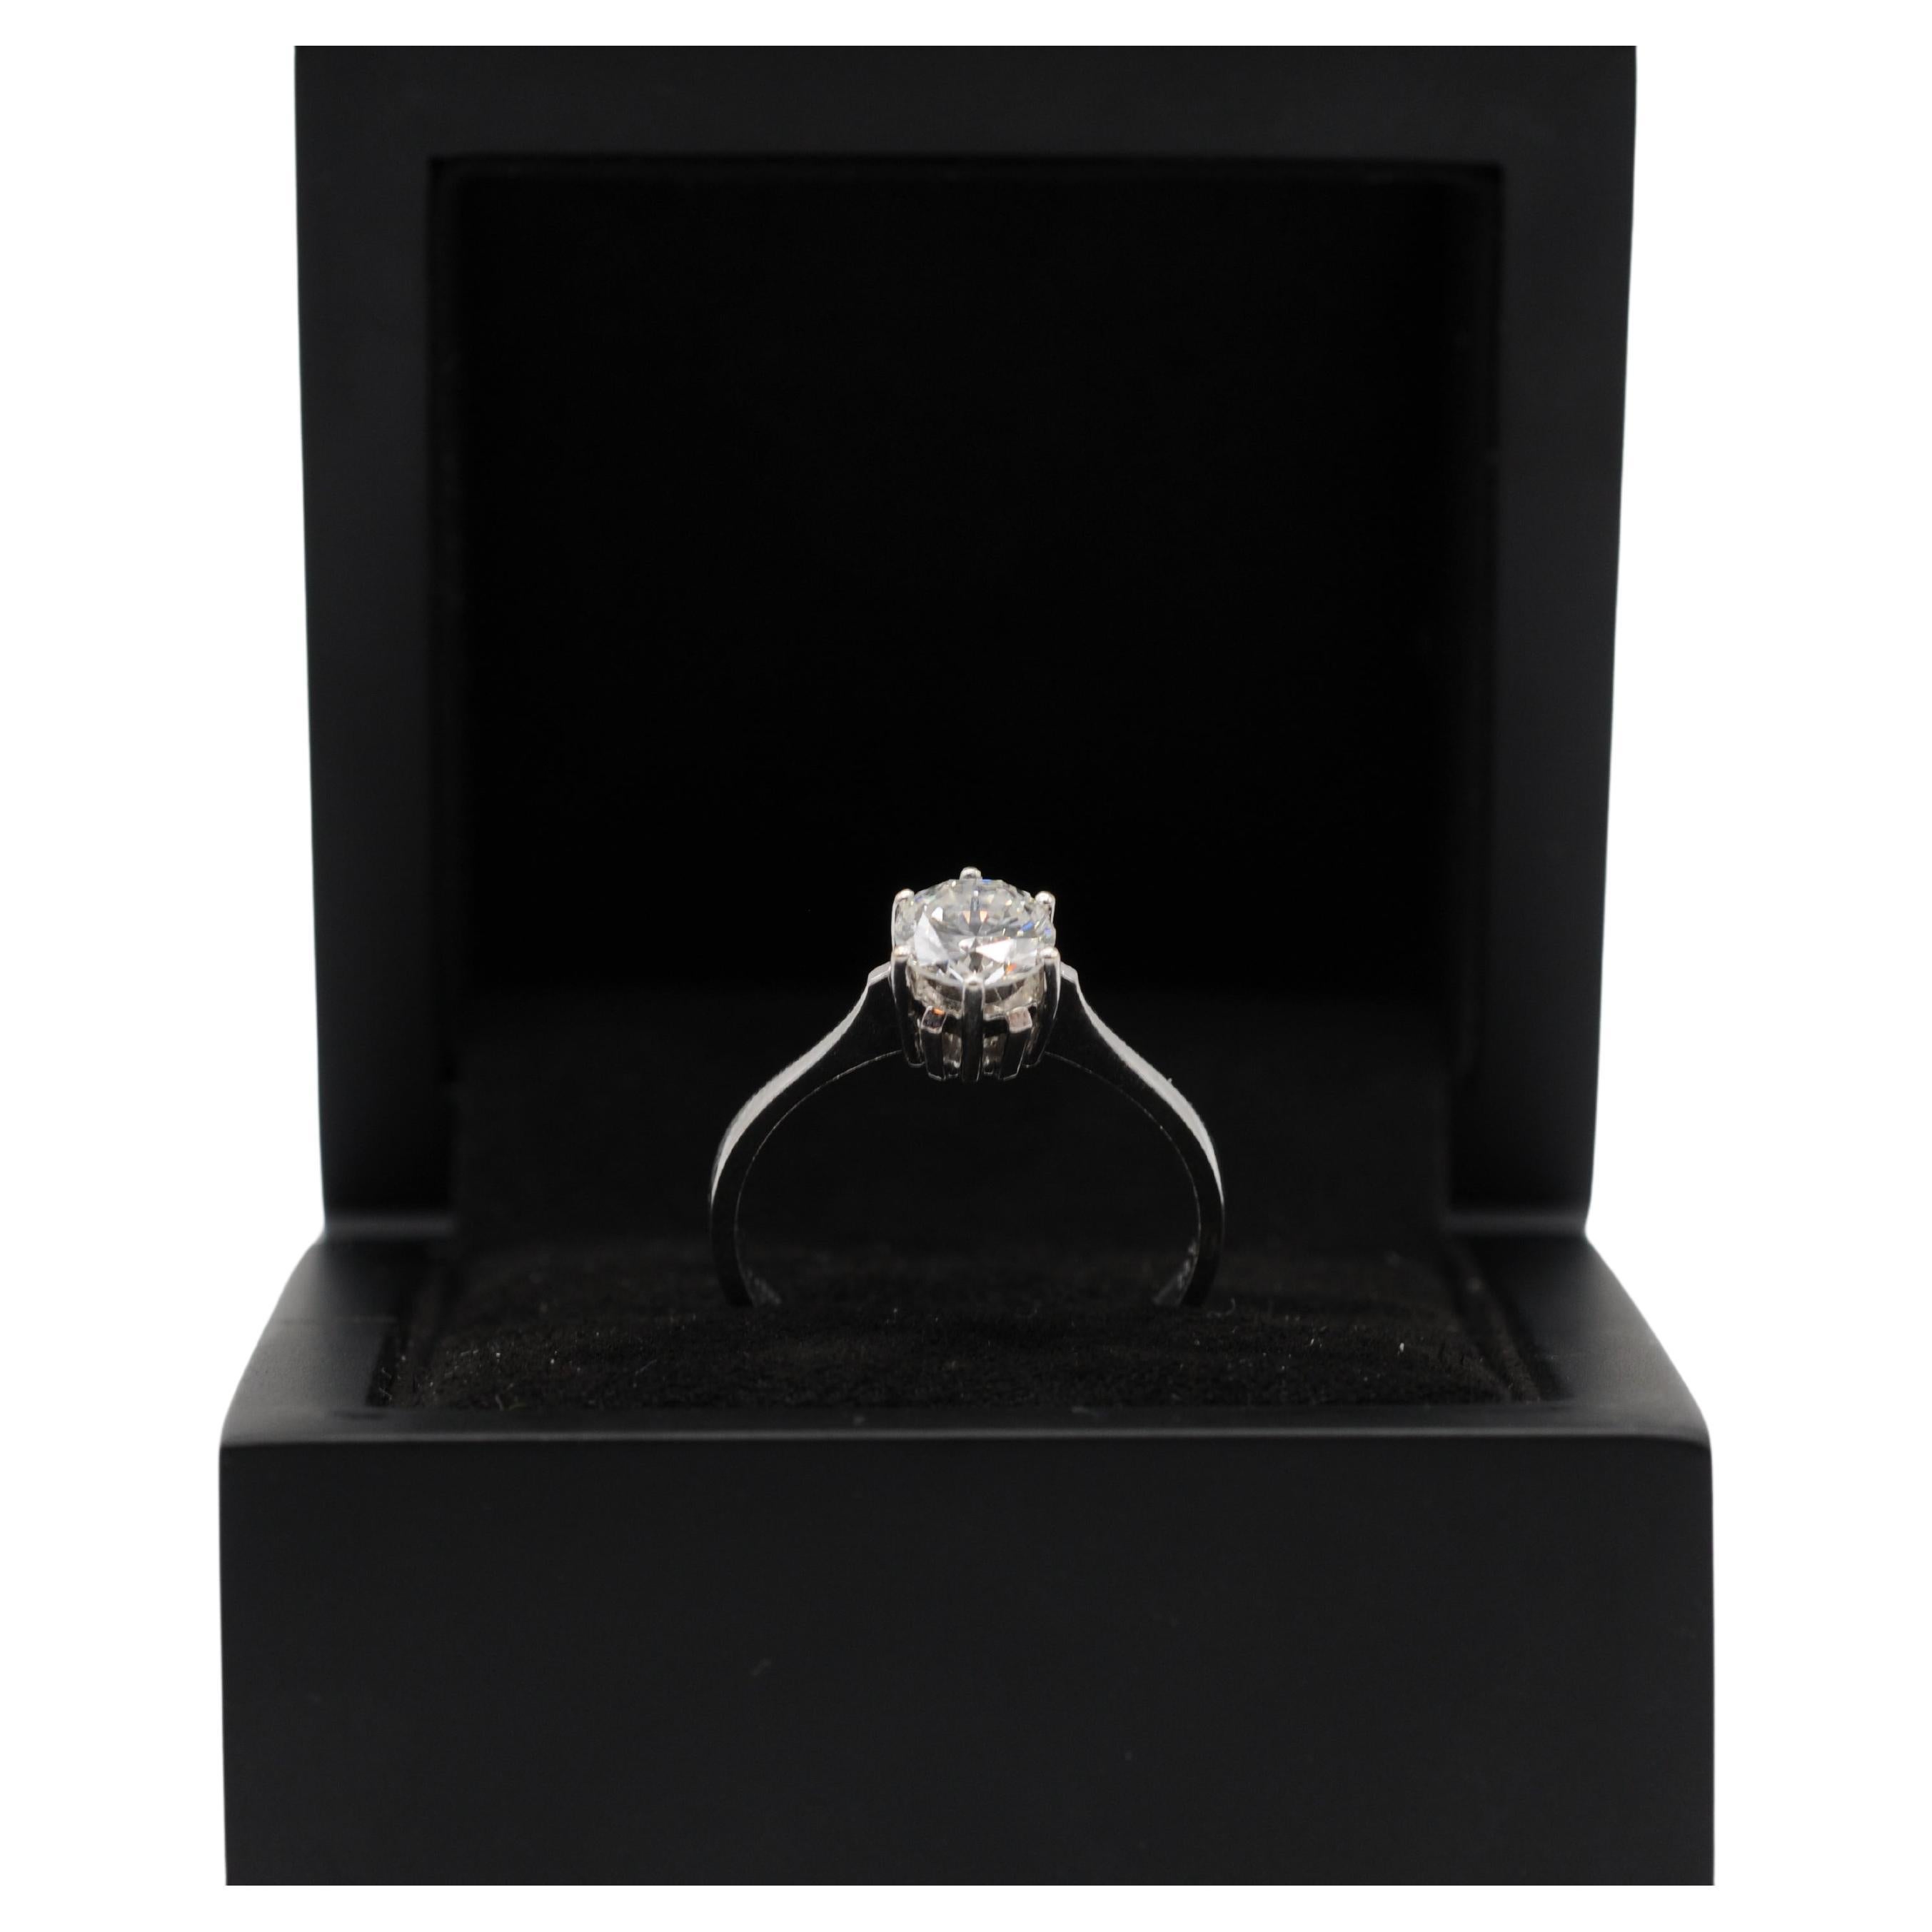 
Embark on a journey of elegance with this exquisite diamond ring featuring a 6-prong crab setting, crafted from lustrous 14k white gold. This captivating ring showcases a diamond with the following exceptional characteristics:

Gemstone